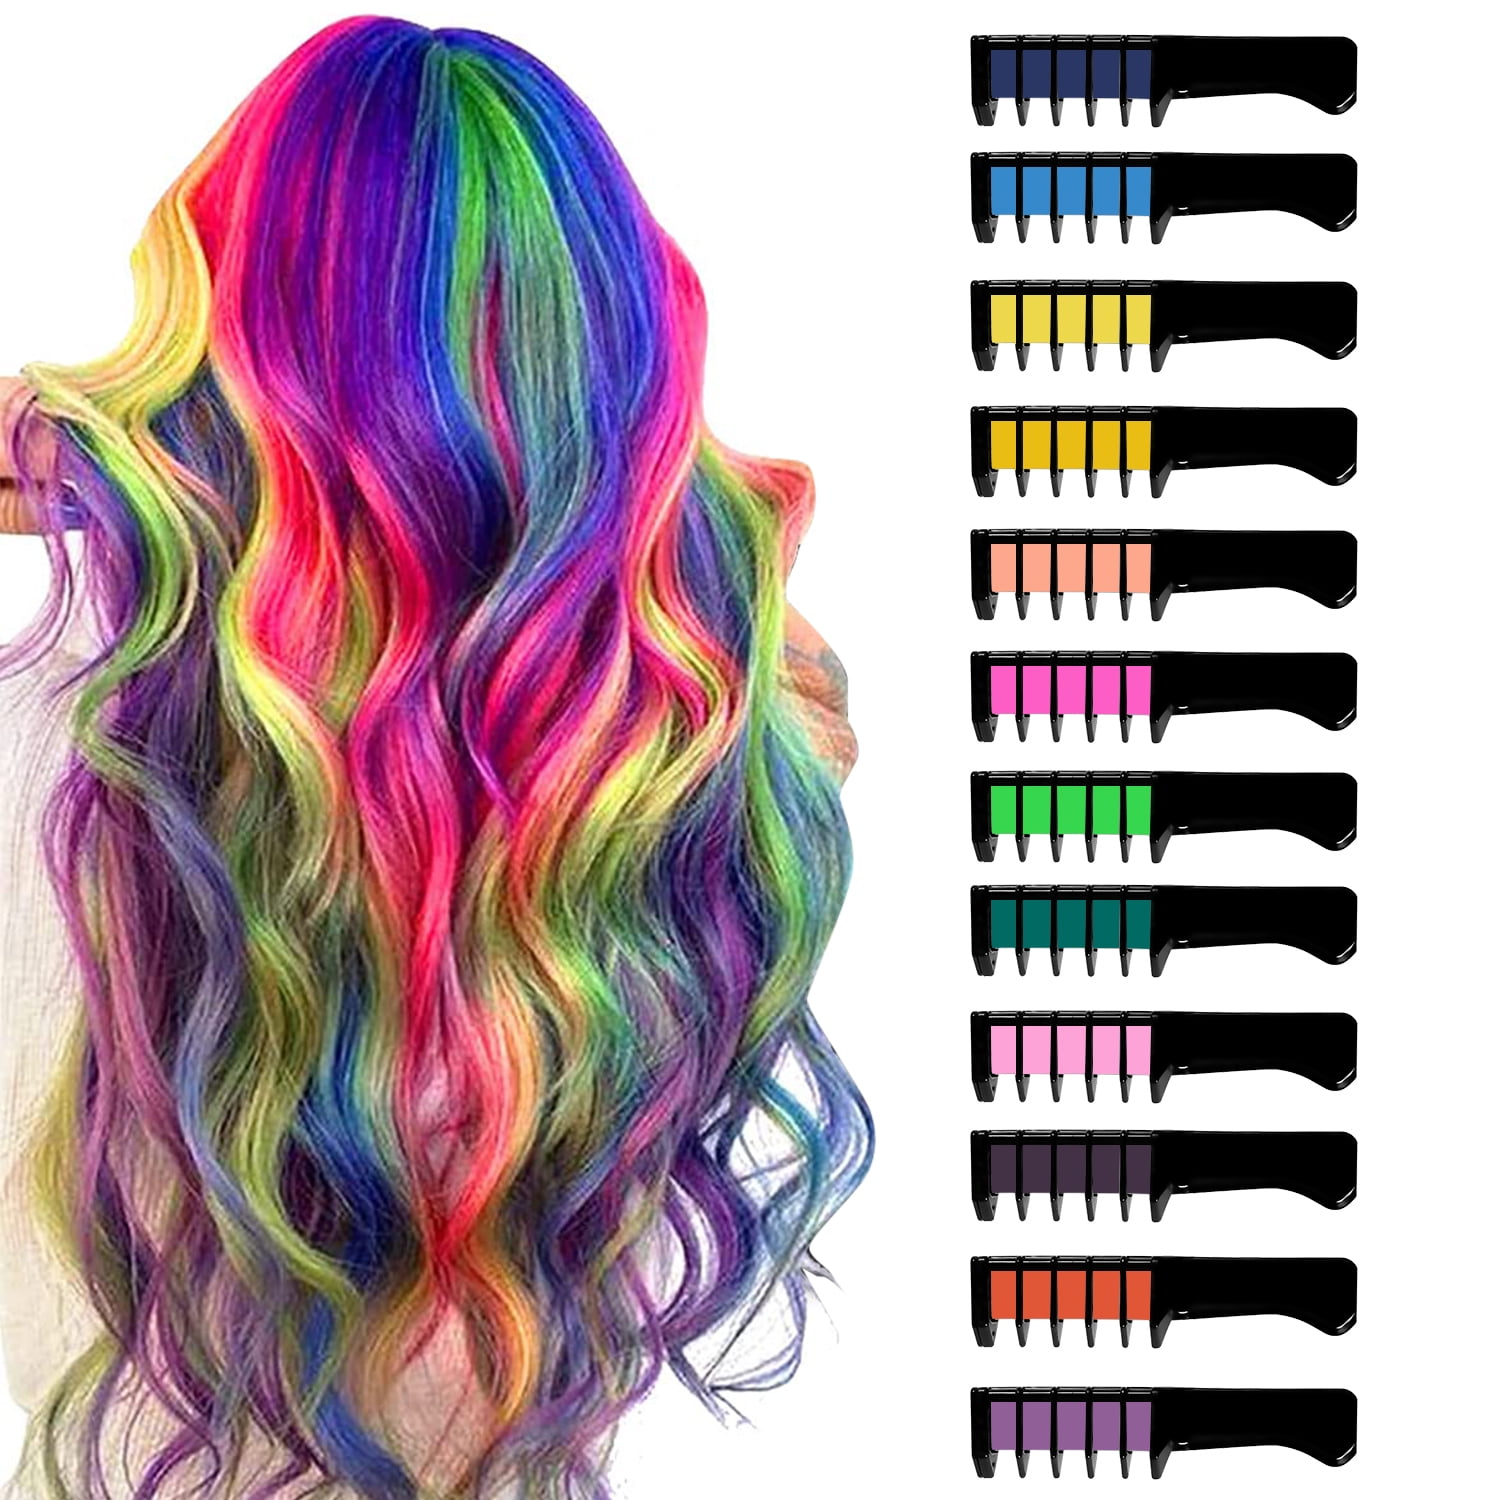 Sanmadrola Hair Chalk Comb for Girls Washable Temporary DIY Hair Color Dye Chalk for Kids Cosplay, Christmas Gifts, 12 Colors, Size: Set 9